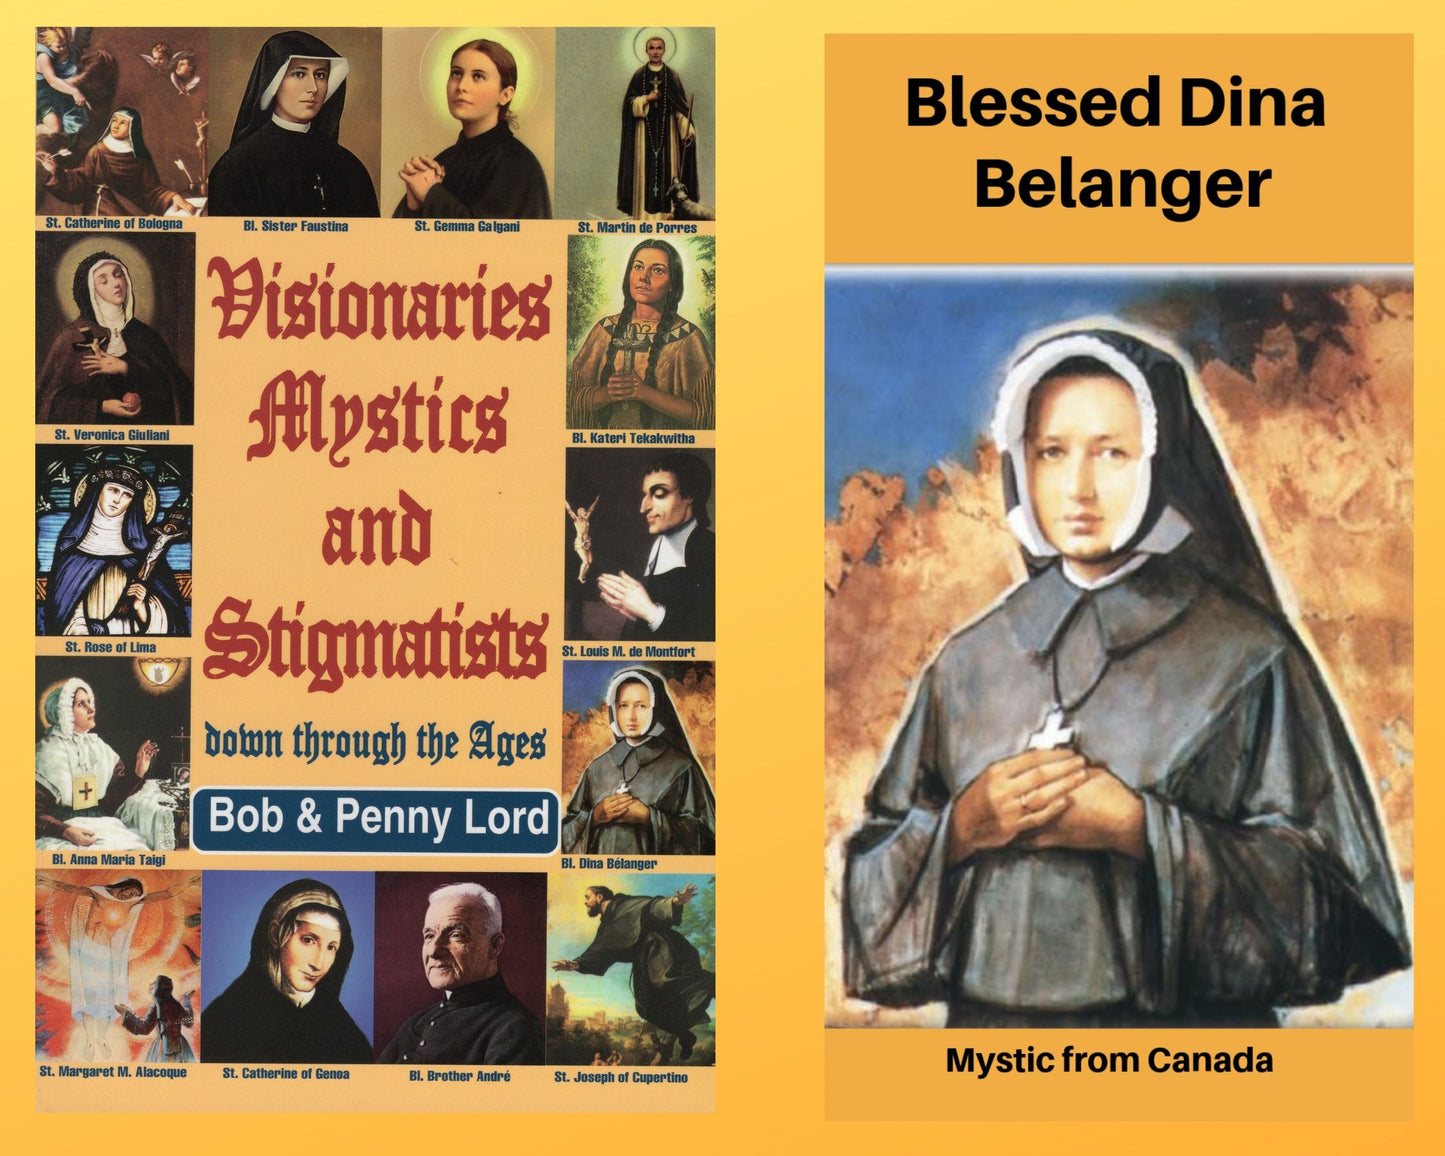 Visionaries Mystics and Stigmatists Book and Companion Blessed Dina Belanger DVD - Bob and Penny Lord